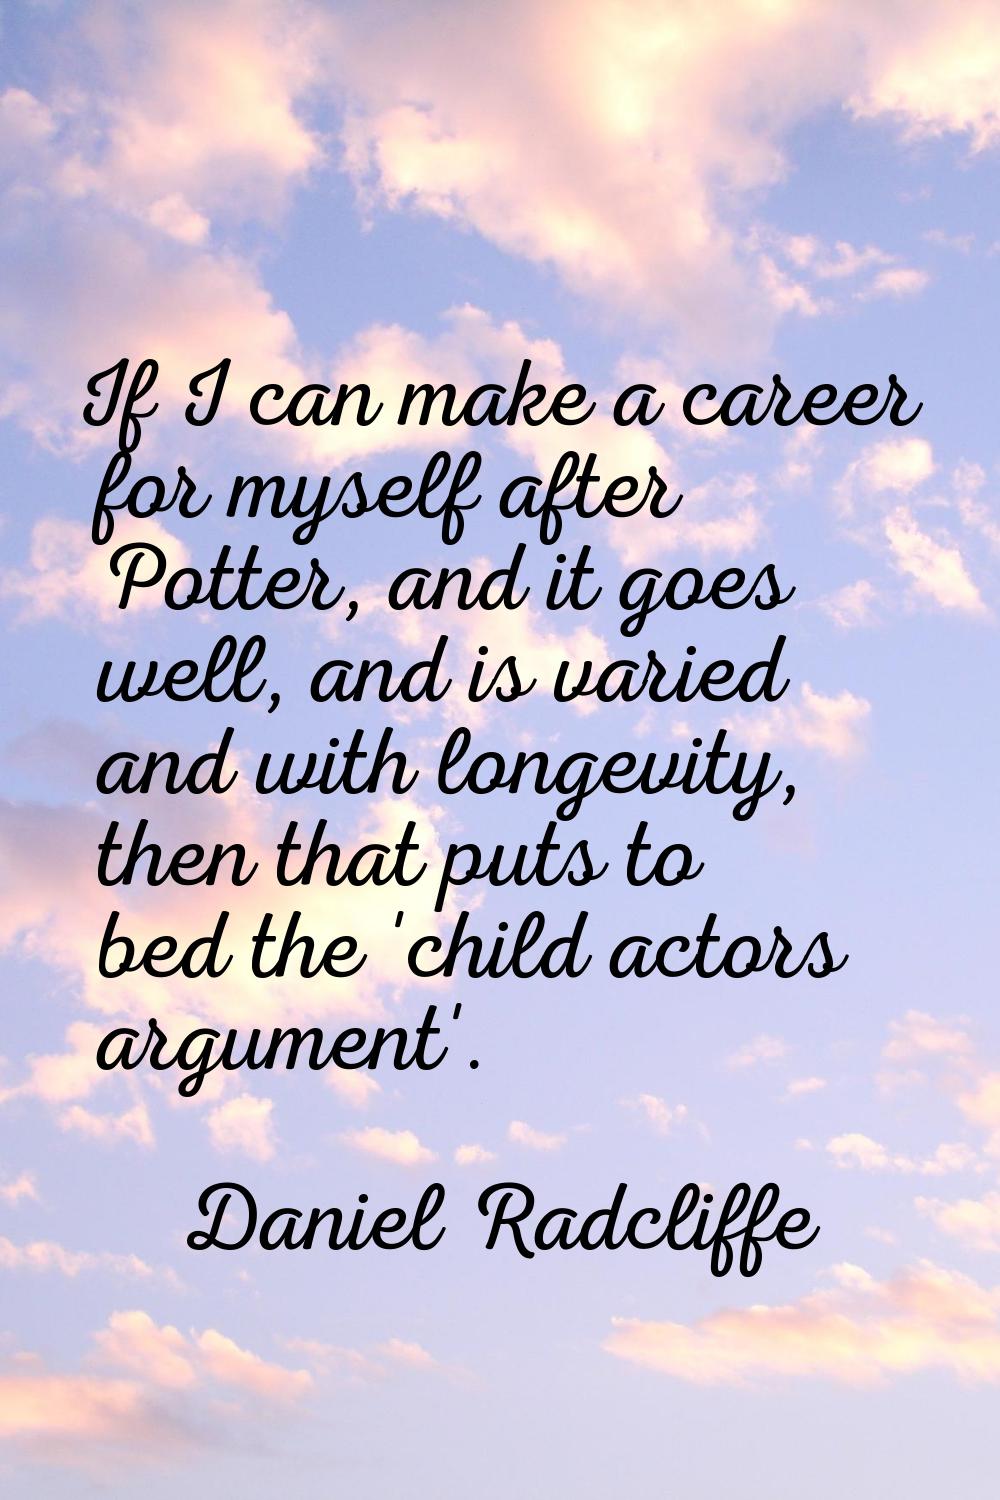 If I can make a career for myself after Potter, and it goes well, and is varied and with longevity,